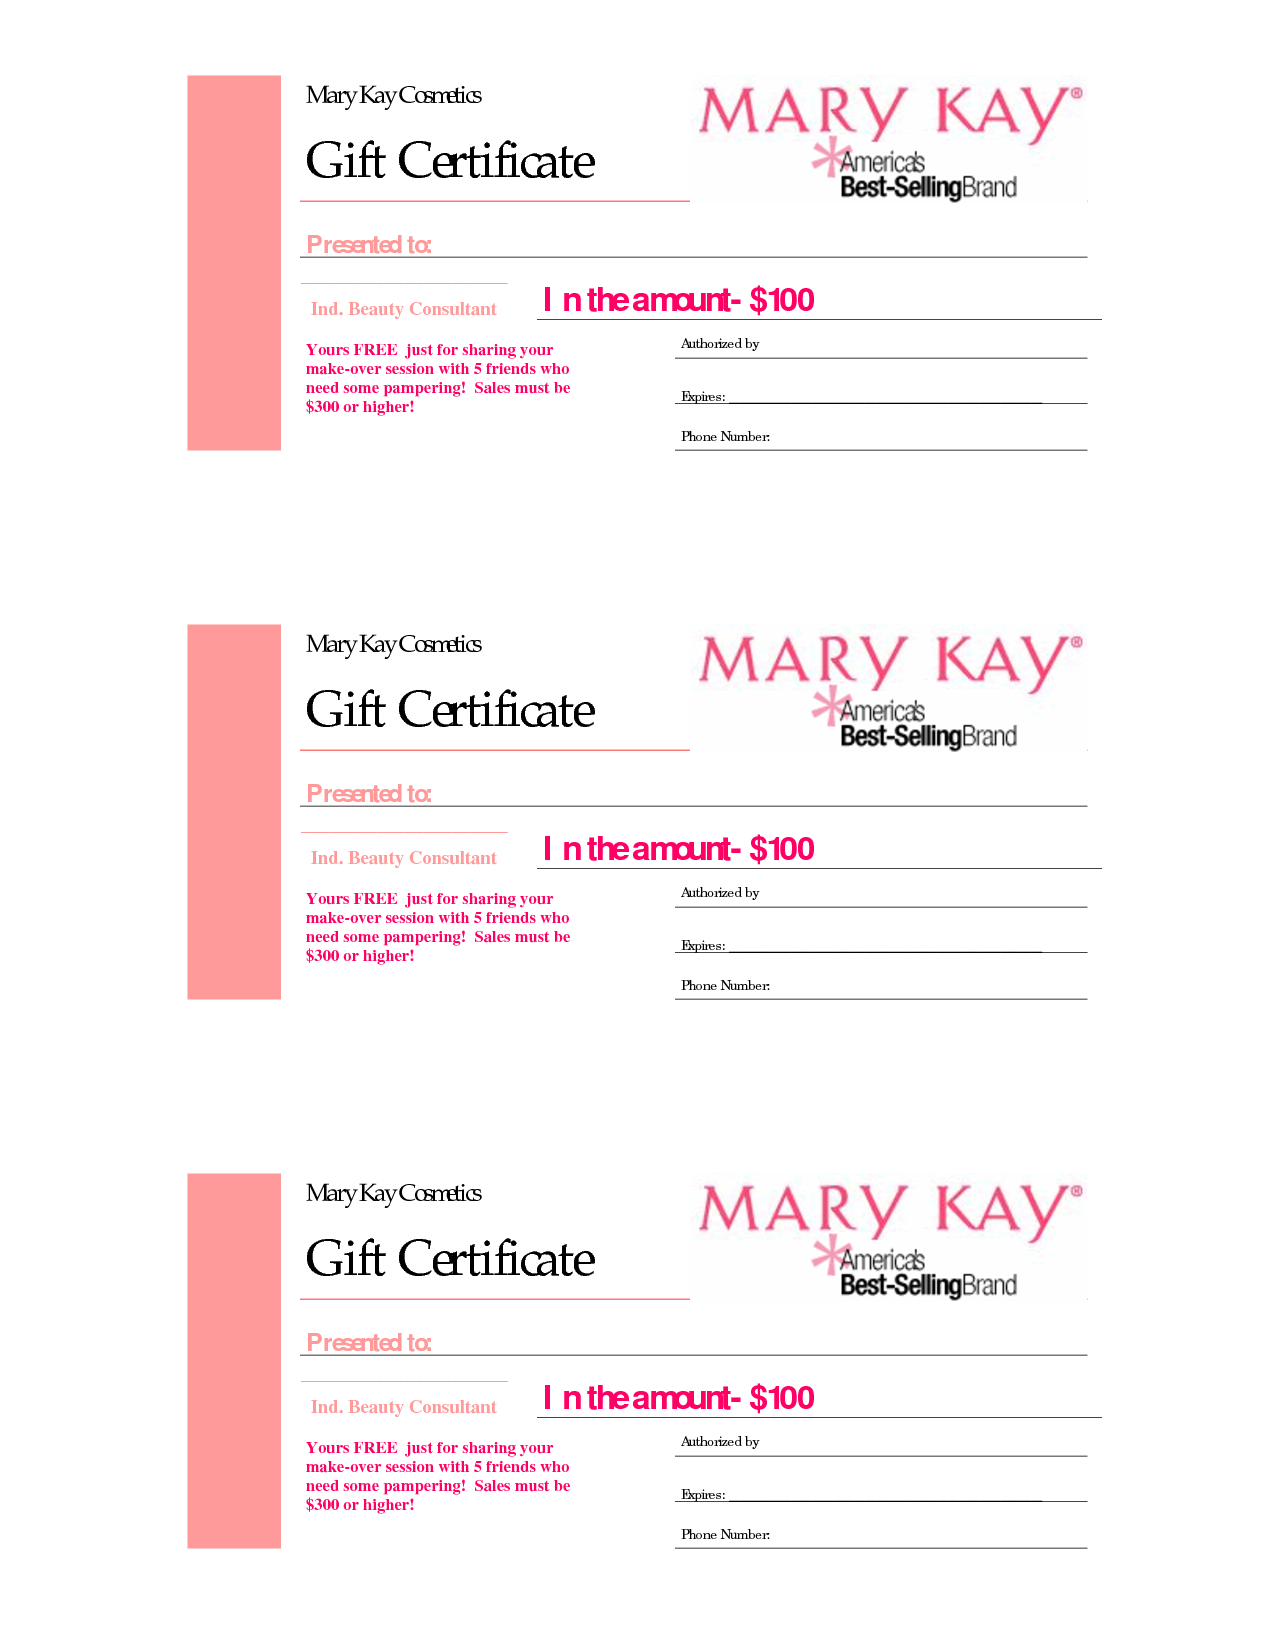 Gift Certificates | Mary Kay Gift Certificate! | Marykay With Regard To Mary Kay Gift Certificate Template